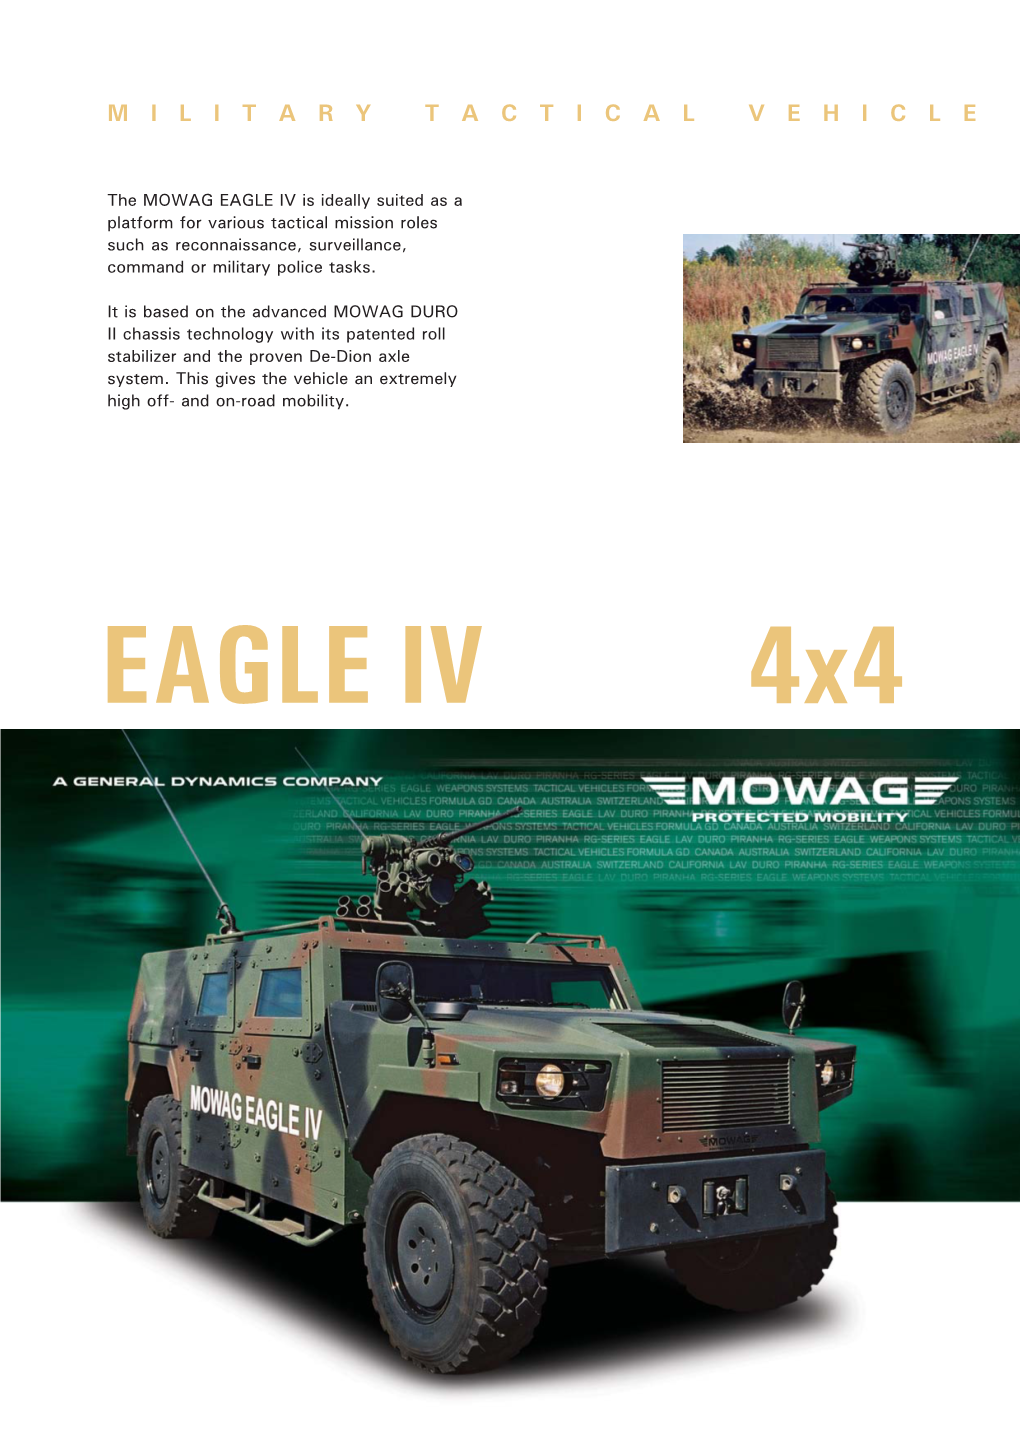 EAGLE IV Is Ideally Suited As a Platform for Various Tactical Mission Roles Such As Reconnaissance, Surveillance, Command Or Military Police Tasks